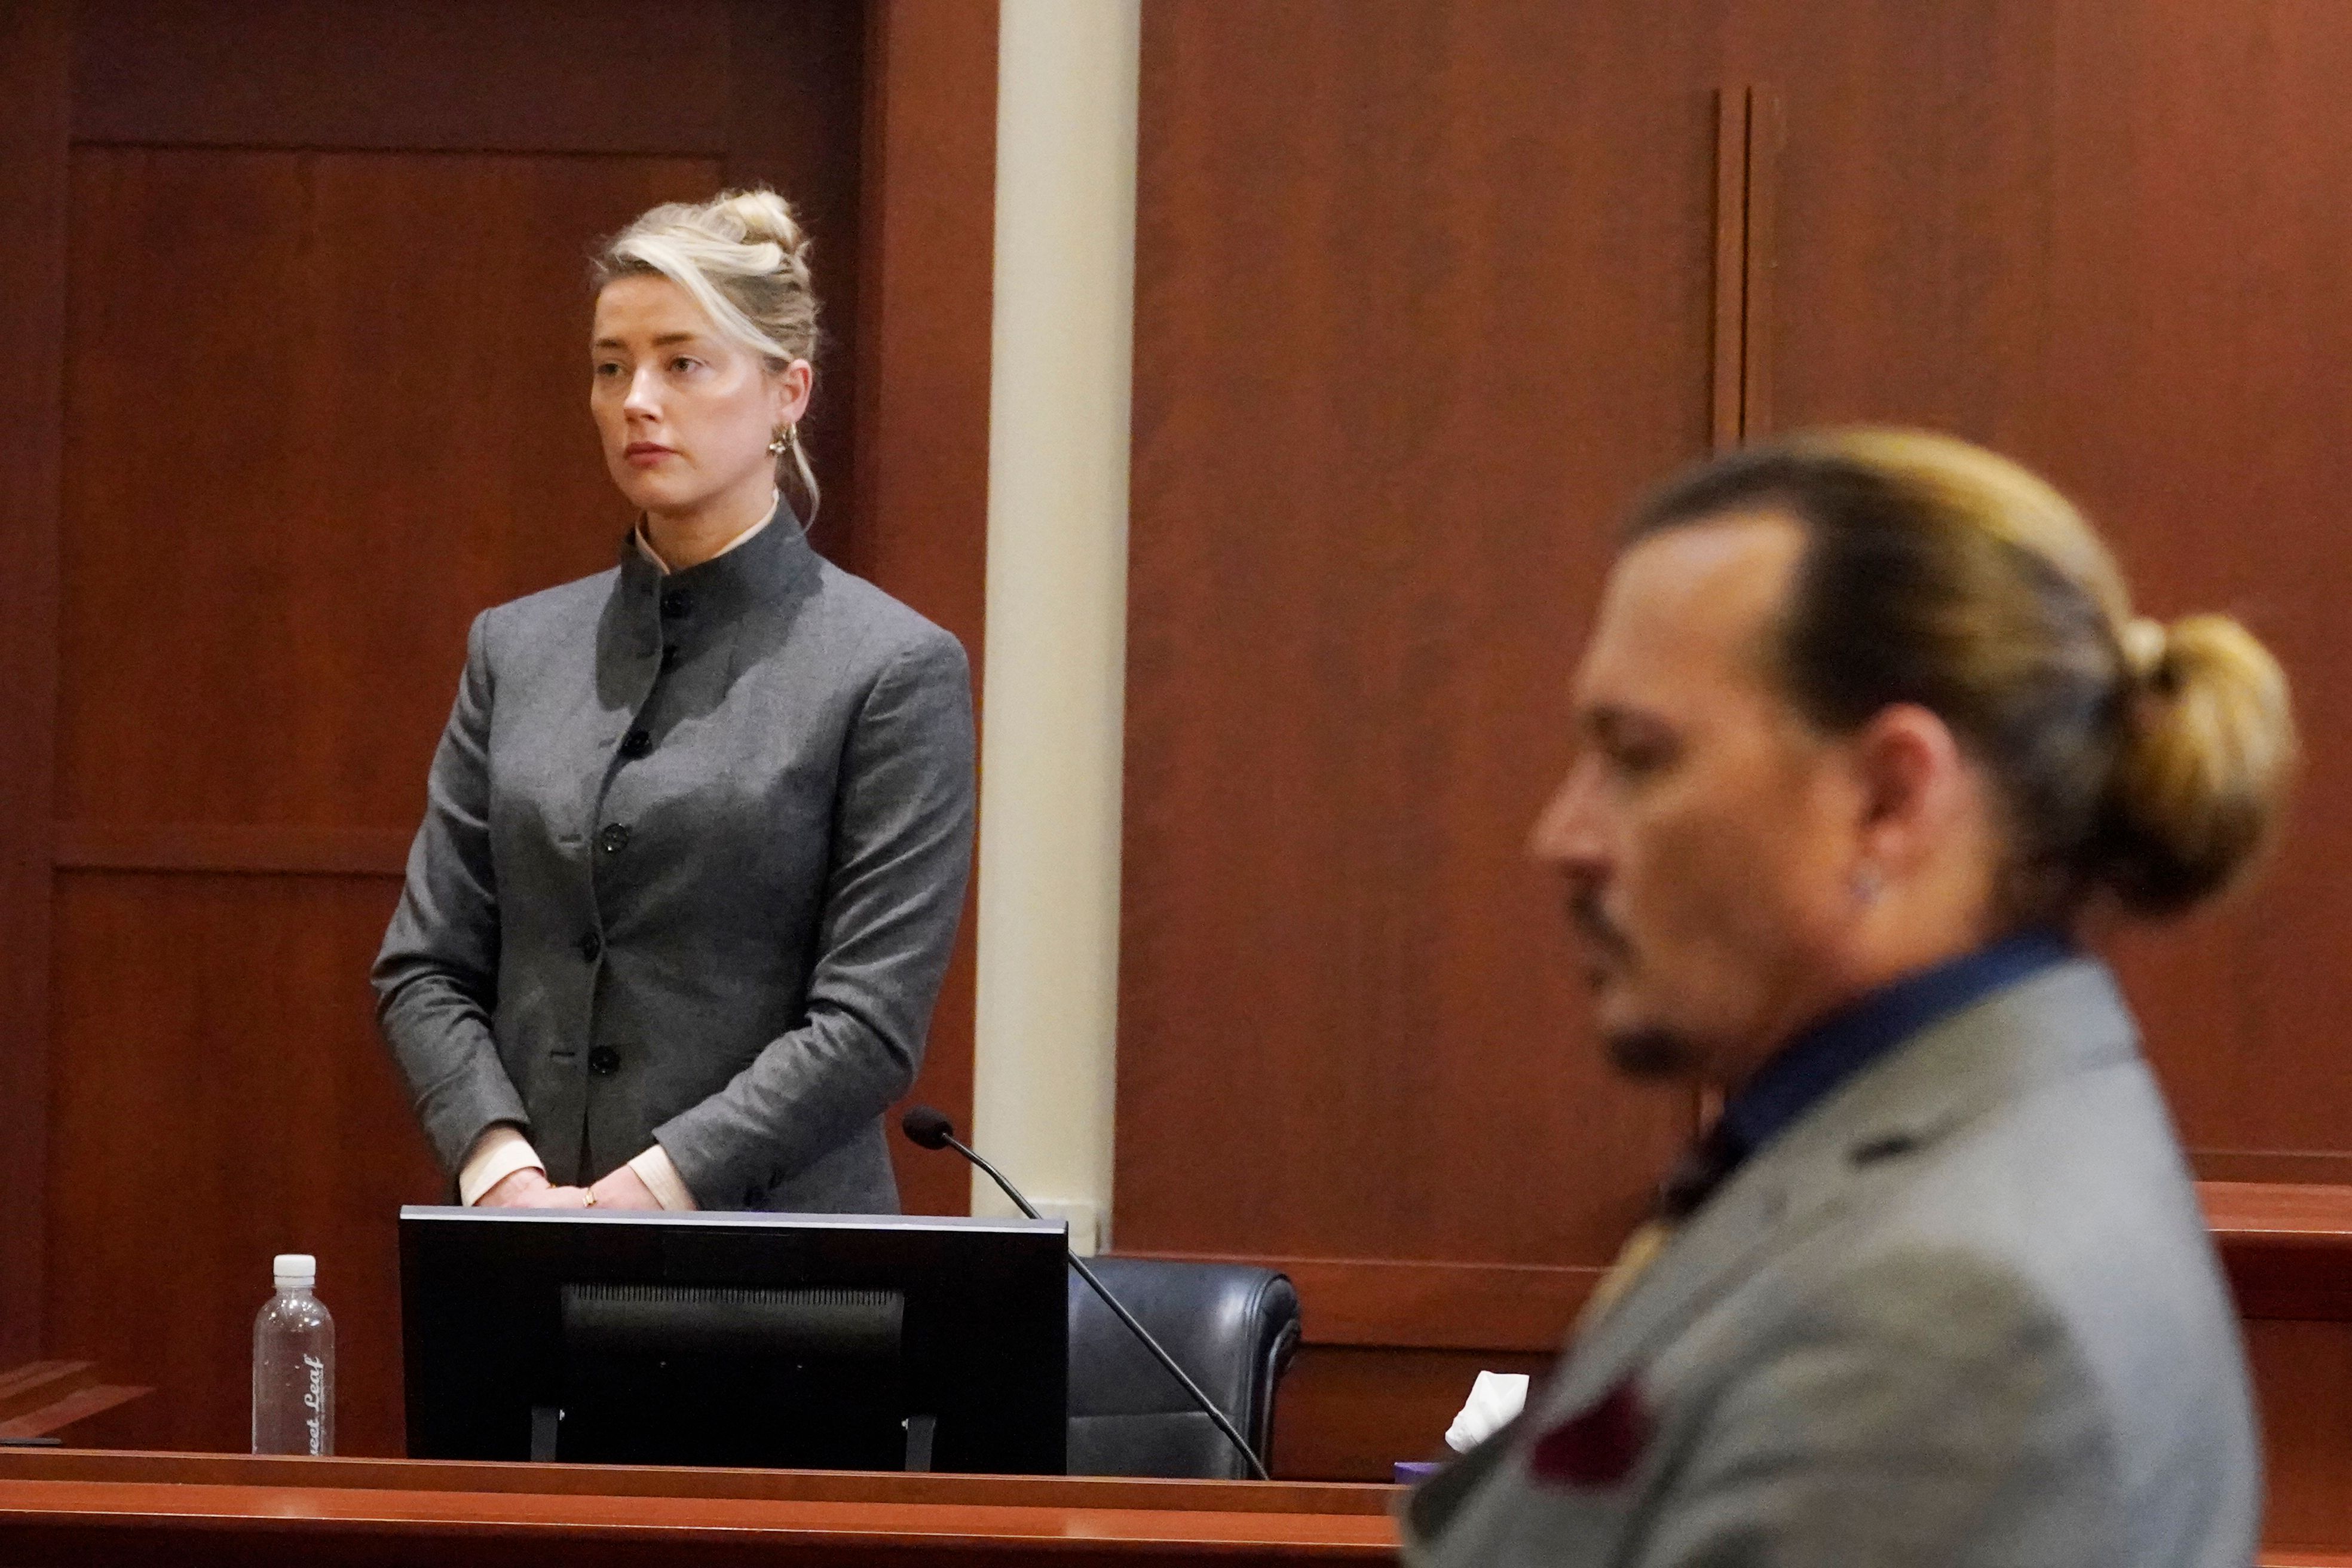 Amber Heard and Johnny Depp watch as the jury leaves the courtroom at the end of the day at the Fairfax County Circuit Courthouse in Fairfax, Virginia, May 16, 2022.